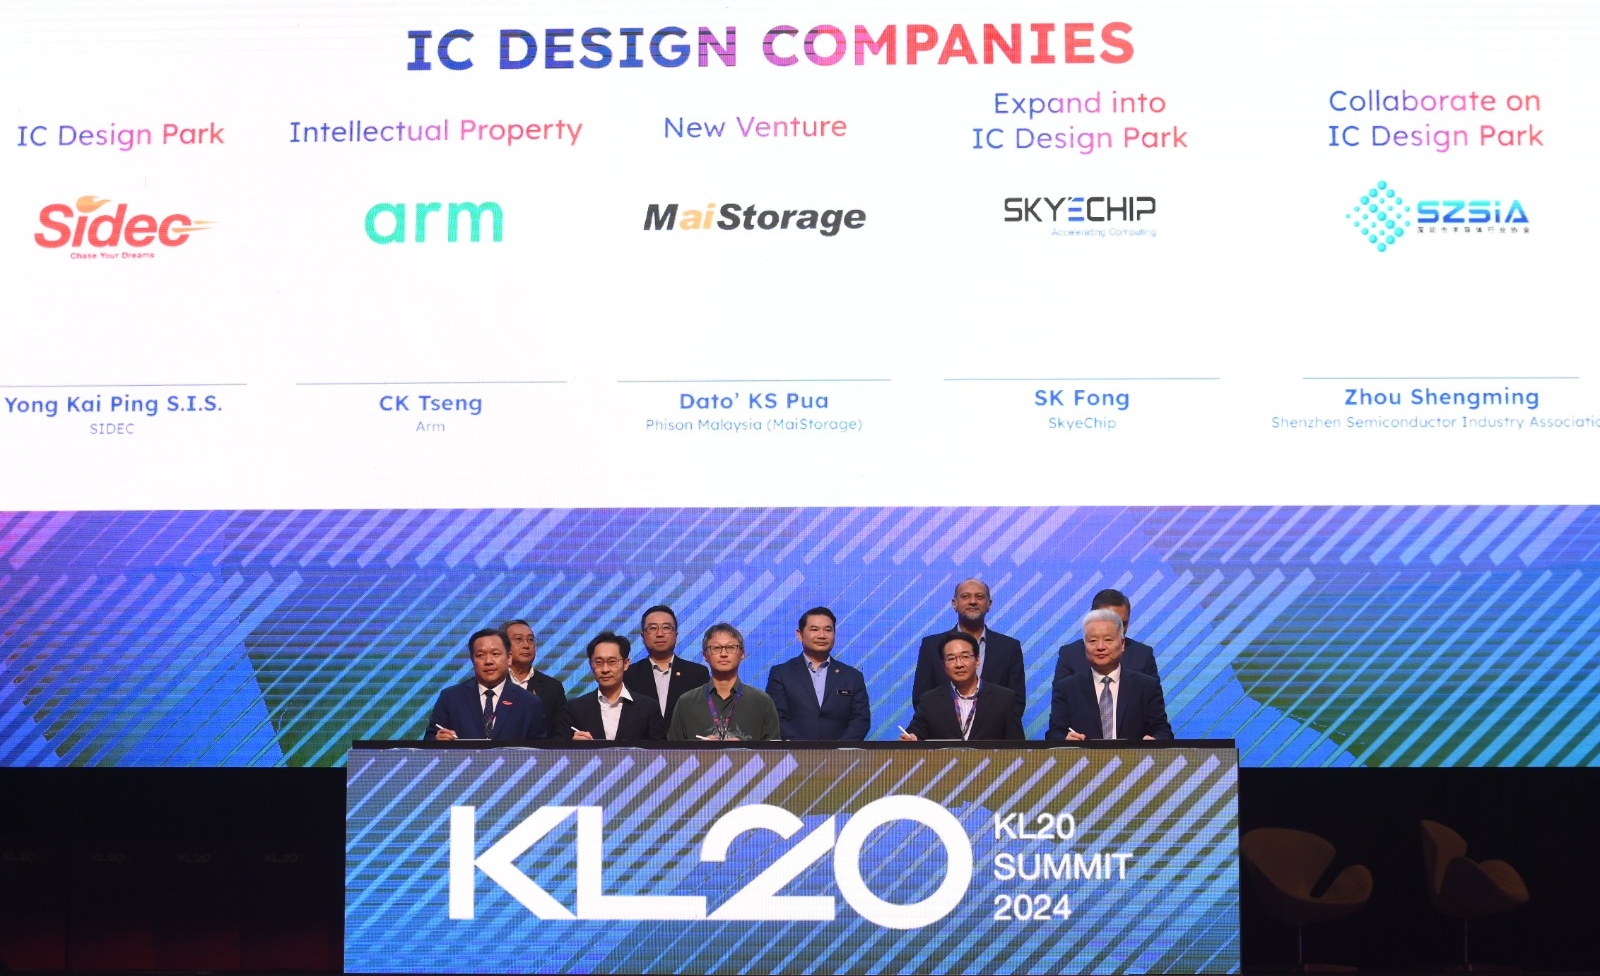 Yong Kai Ping (left), CEO of Sidec, at the Letter of Intent signing with CK Tseng of ARM Inc (2nd left); Pua Khein-Seng (3rd from left) CEO of Phison Malaysia (MaiStorage); Fong Swee Kiang (2nd from right), CEO of SkyeChip Sdn Bhd and Zhou Shengming from the Shenzhen Semiconductor Industry Asso (right).